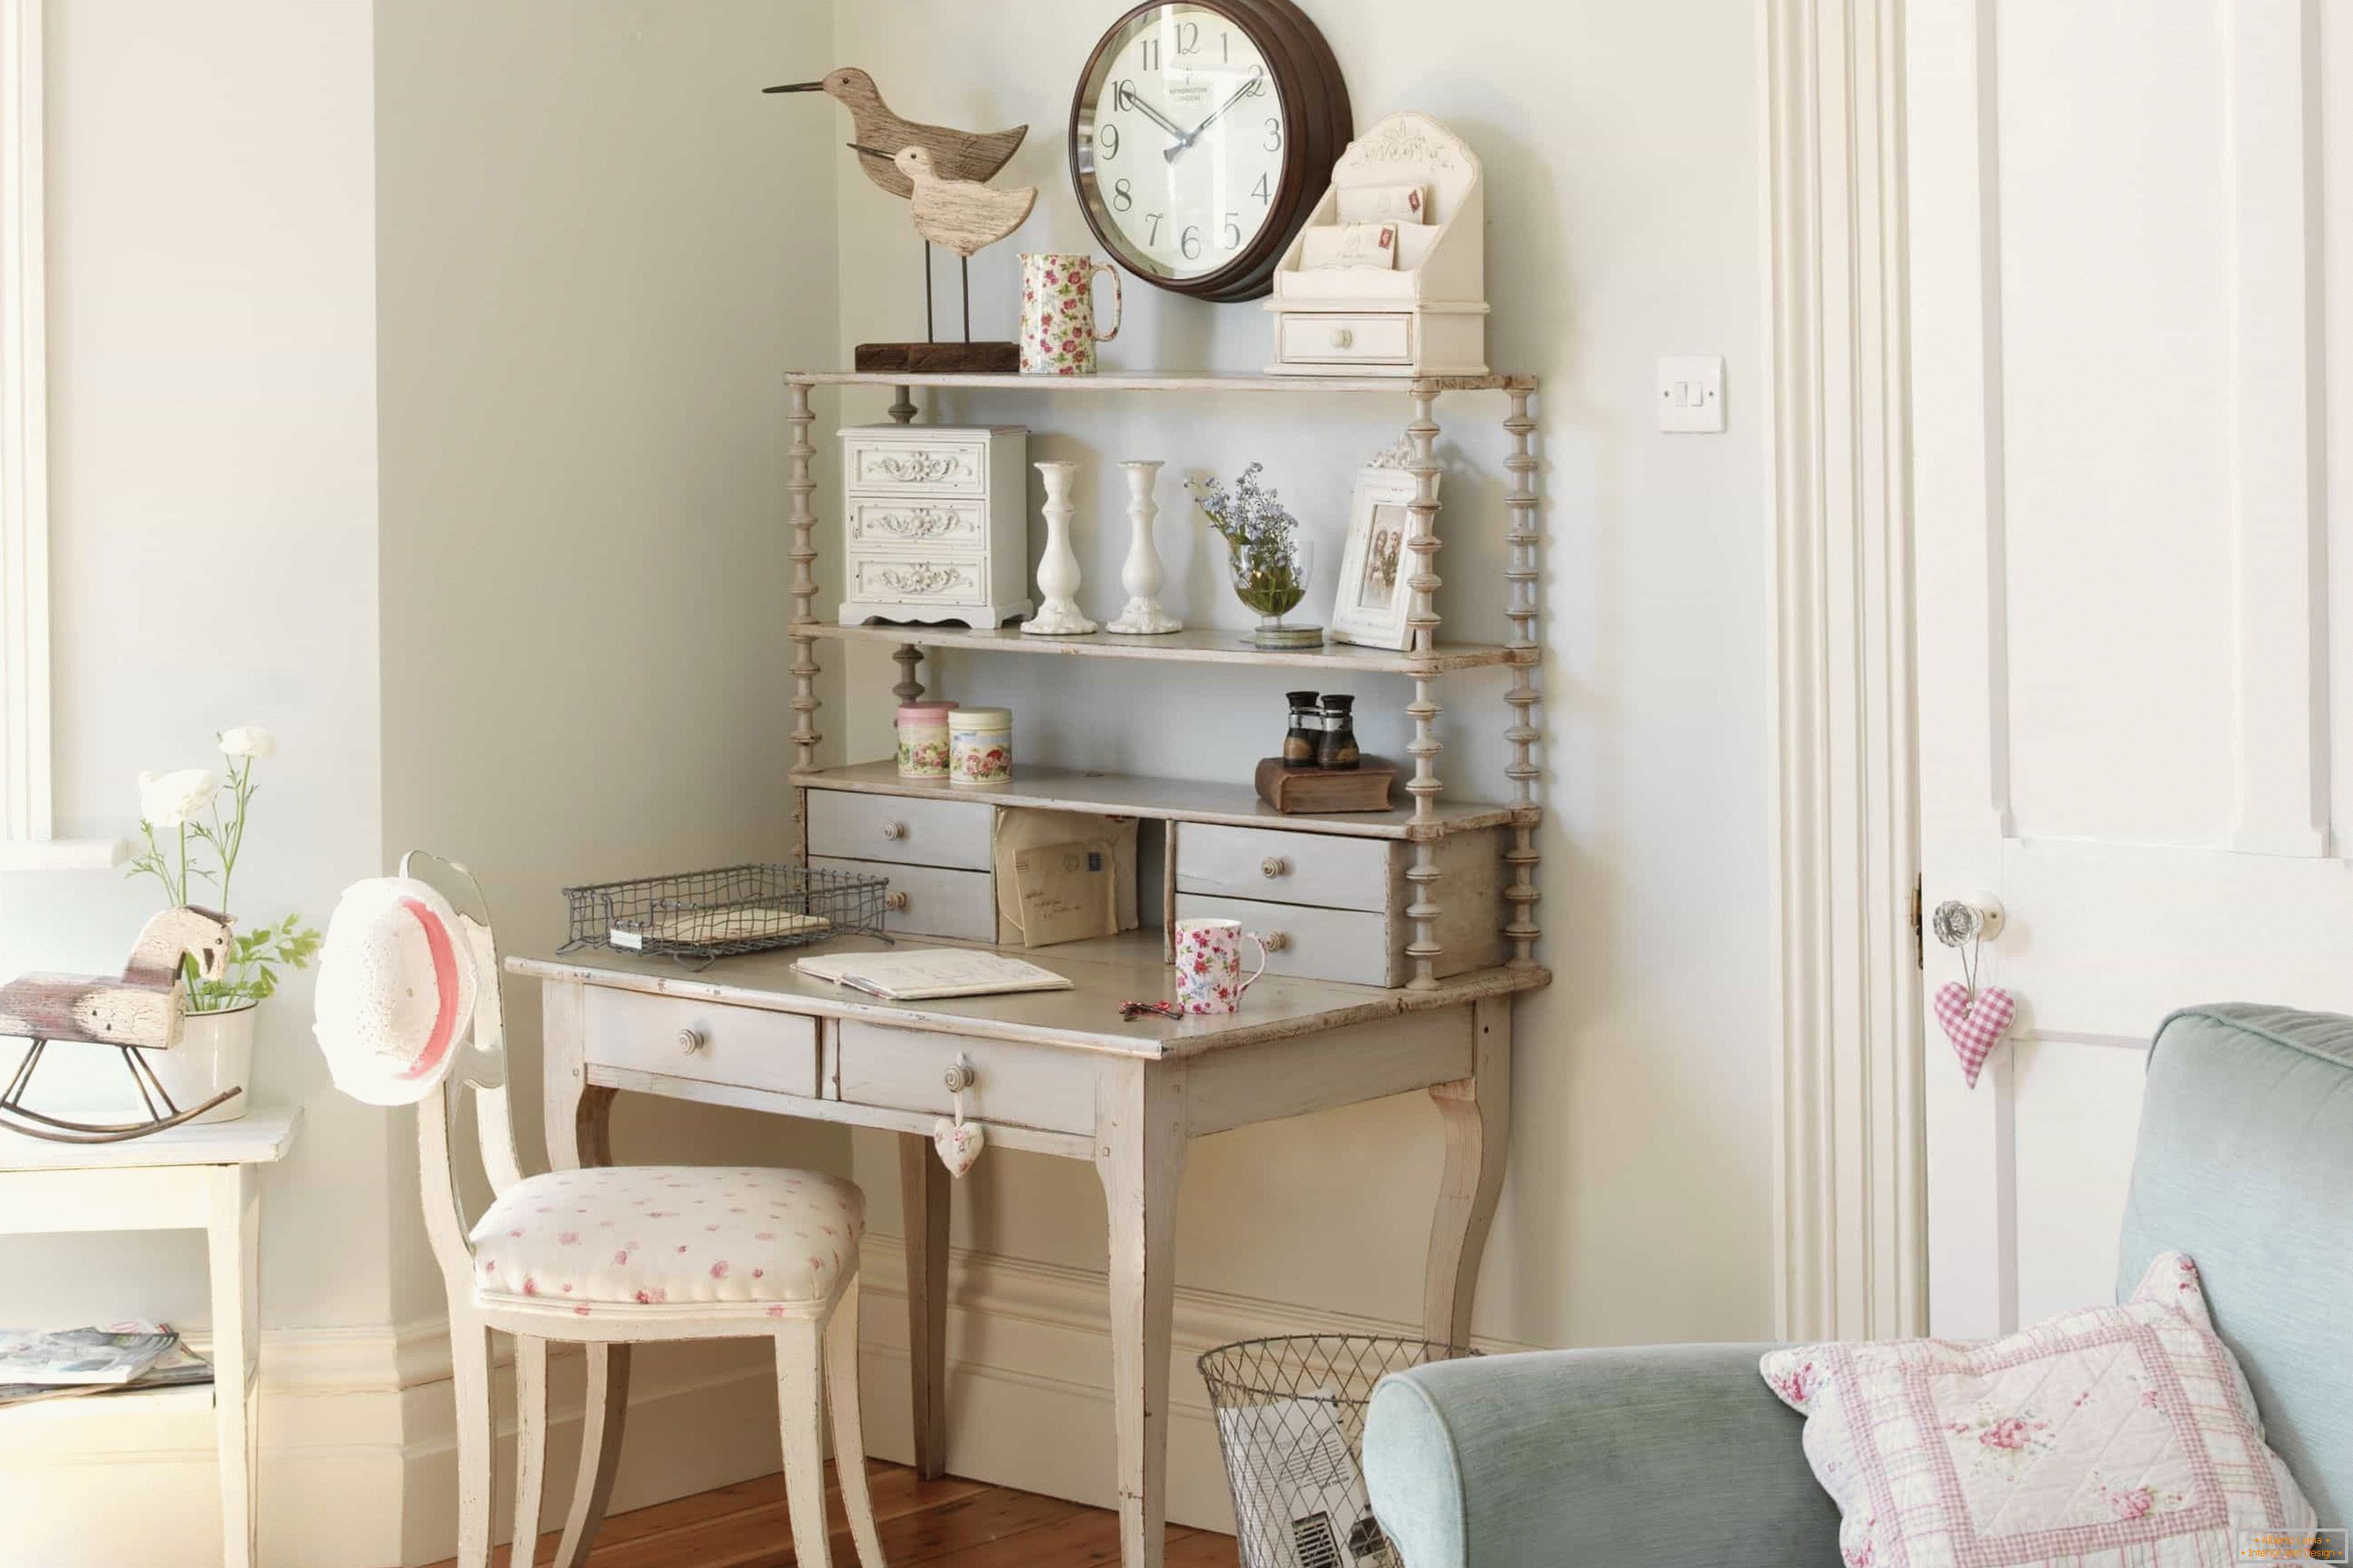 Interior items for creating a vintage house style